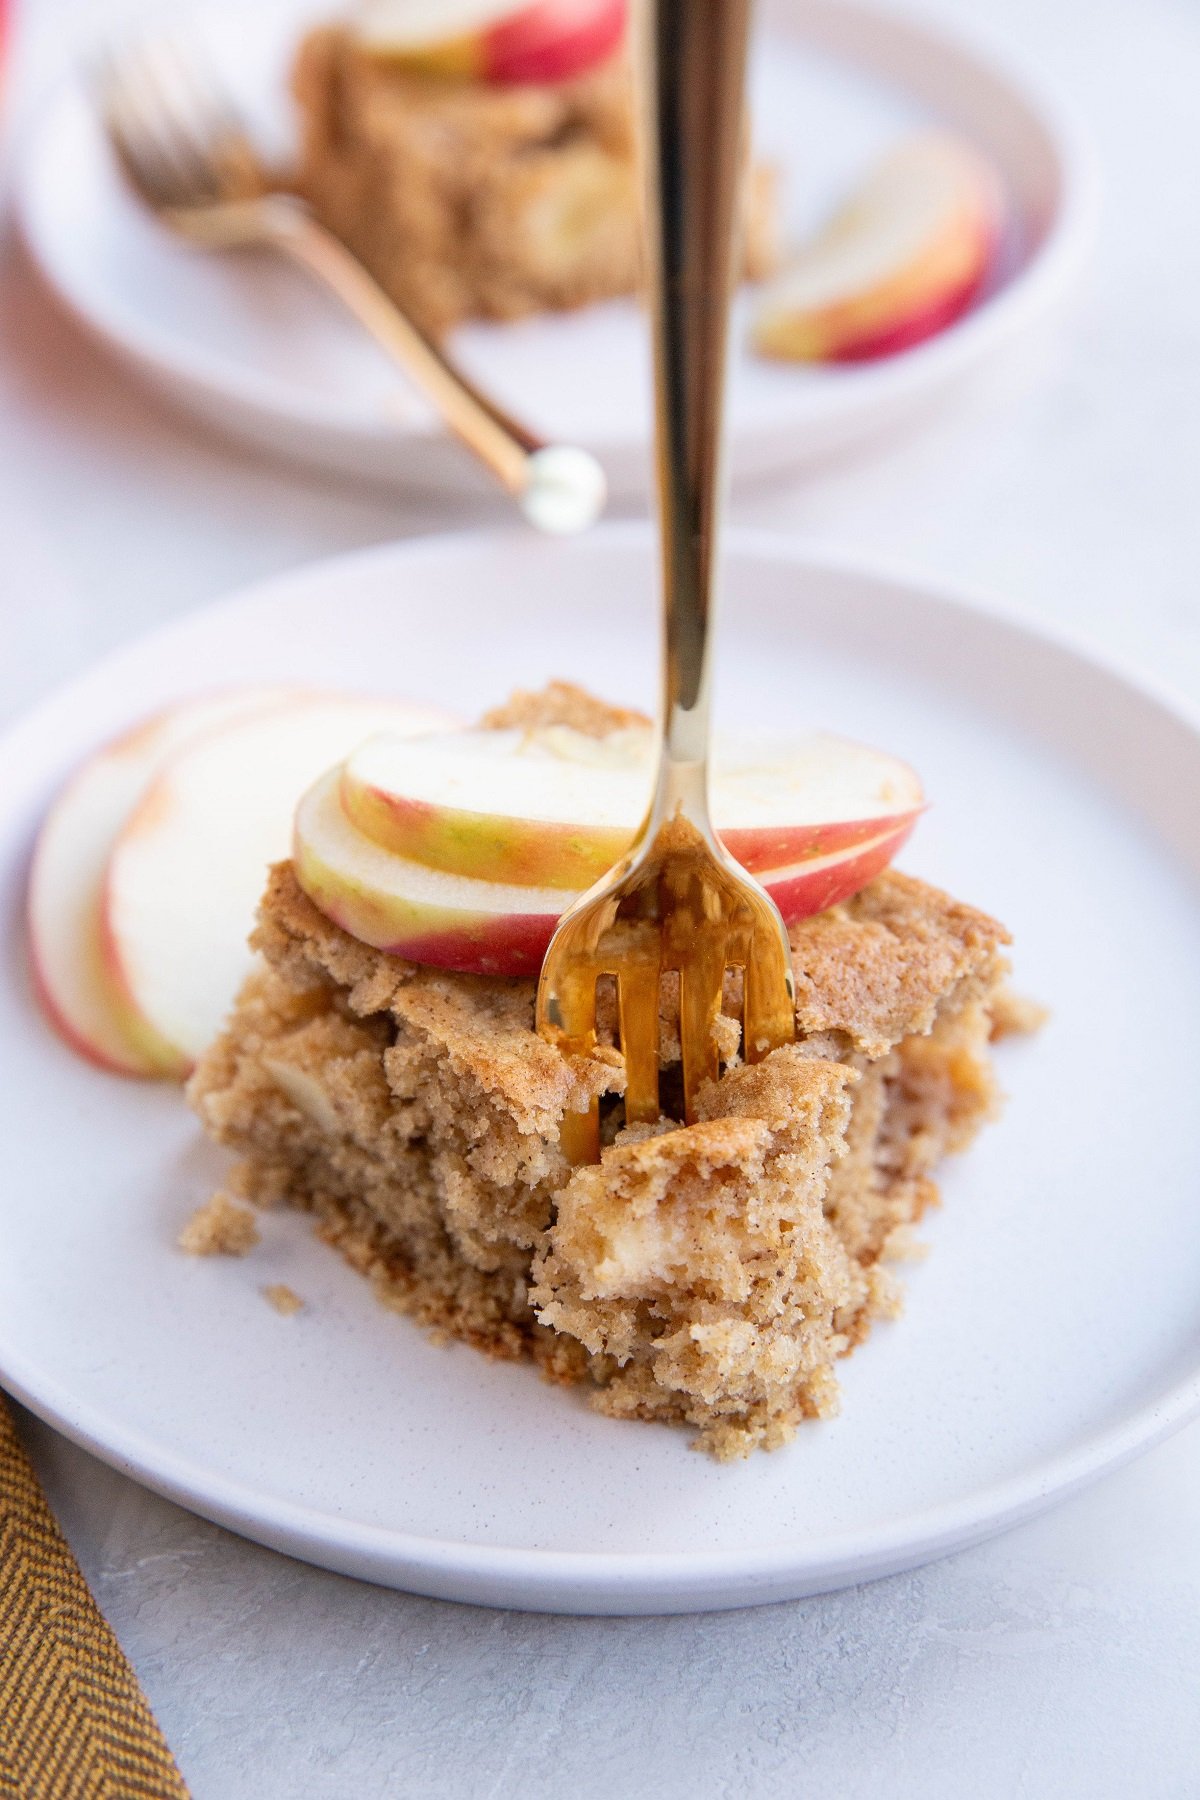 Slice of apple cake on a white plate with a fork taking a bite.